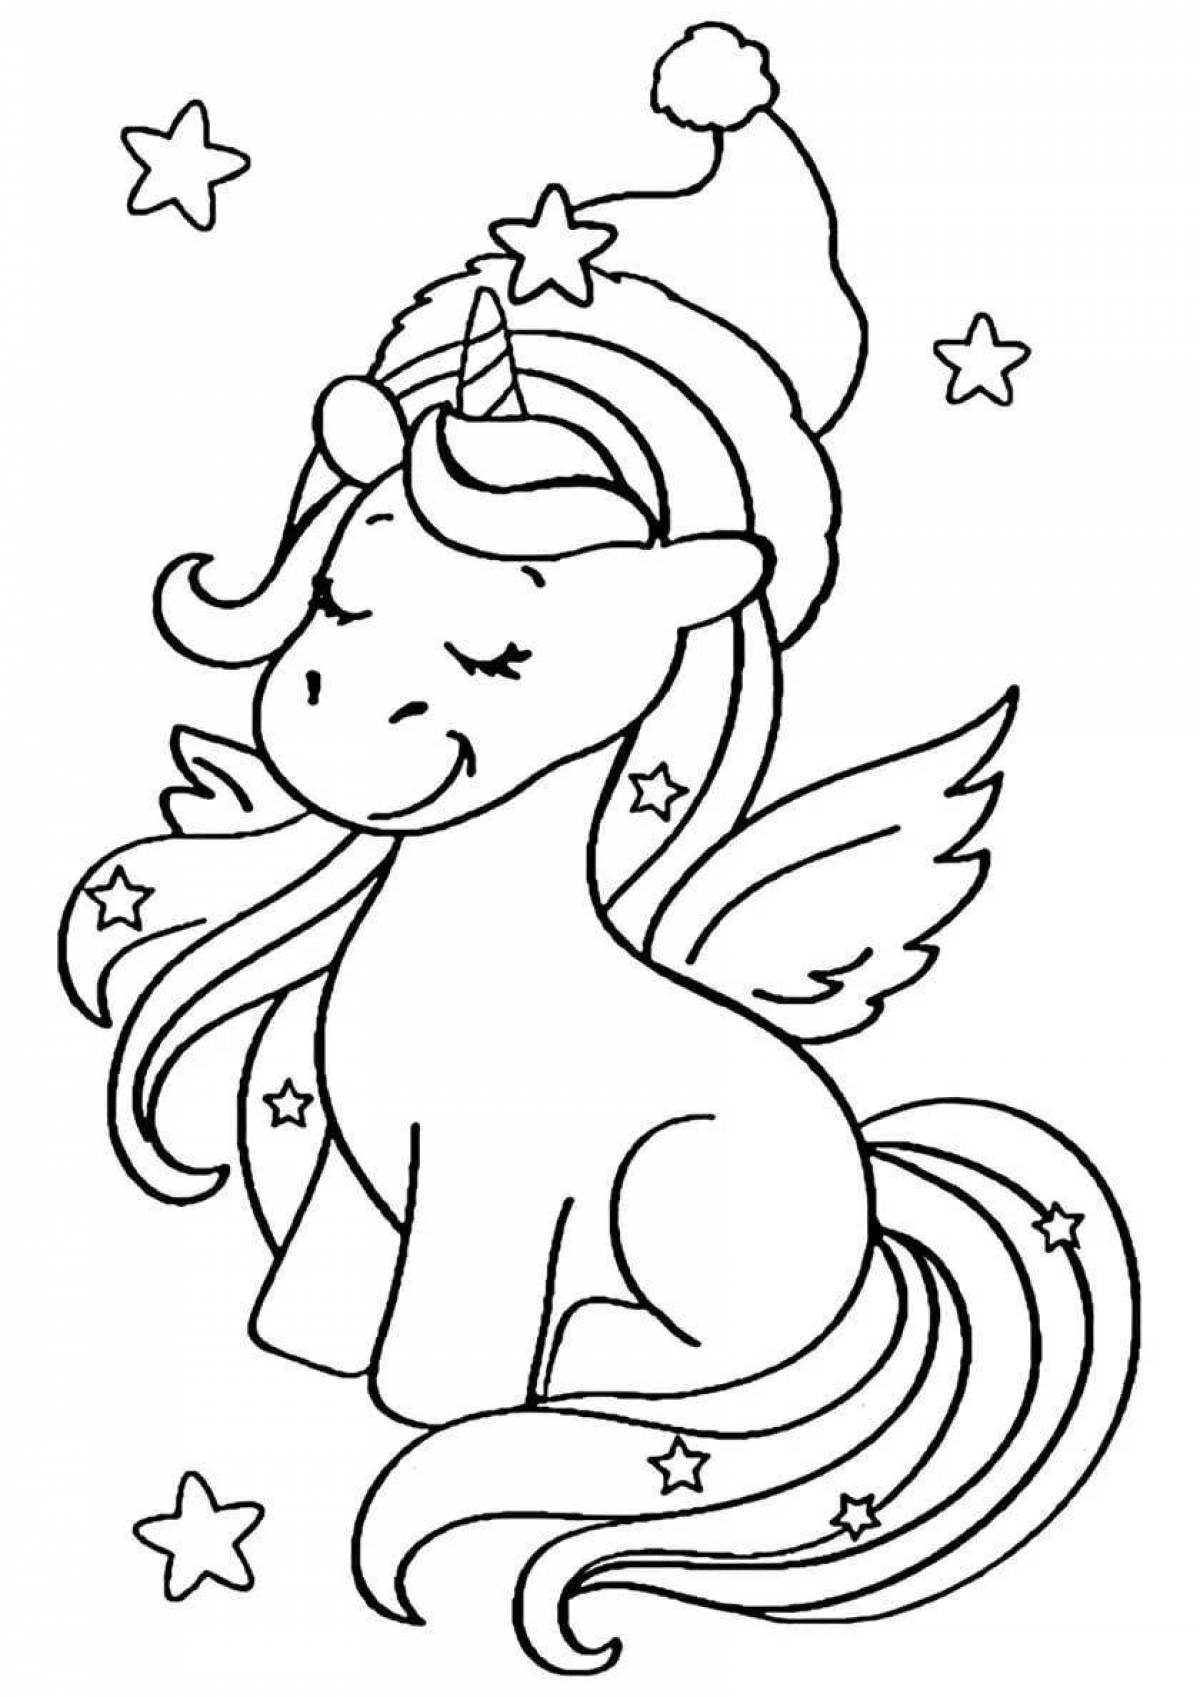 Cute 5-6 year old coloring book for girls unicorns